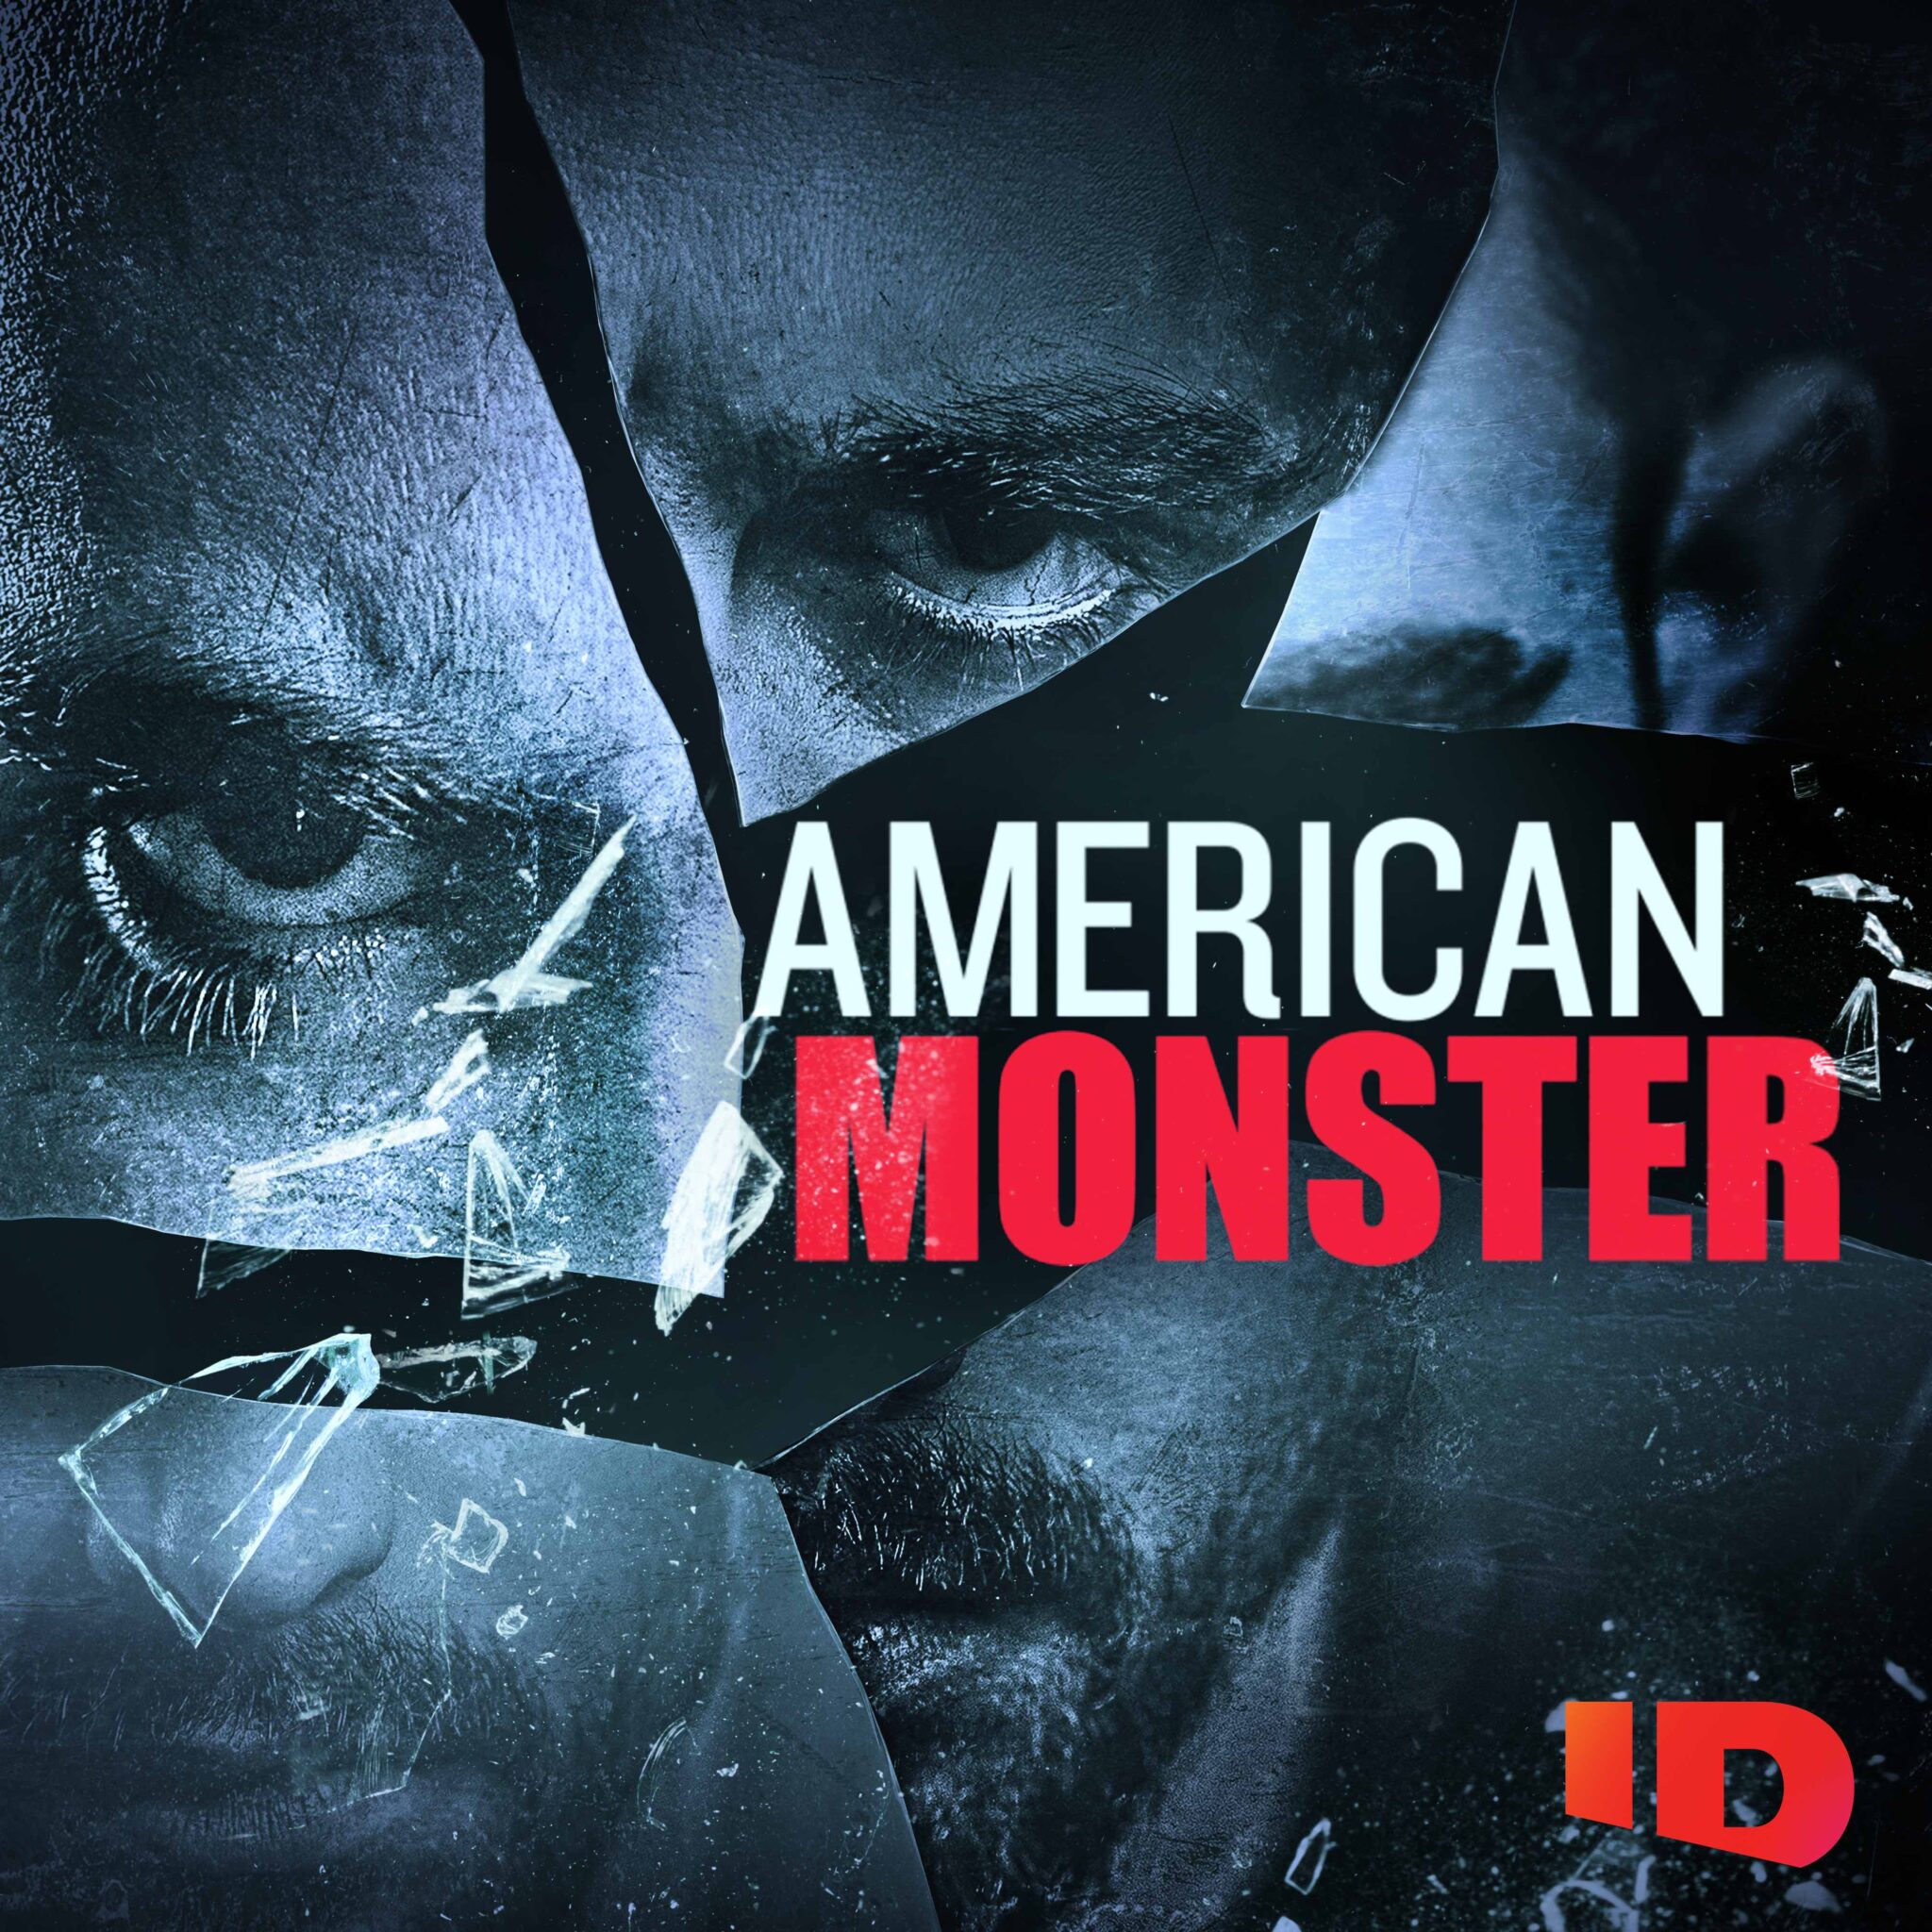 A promotional image for Arrow Media's hit TV series American Monster, powered by Limecraft. 